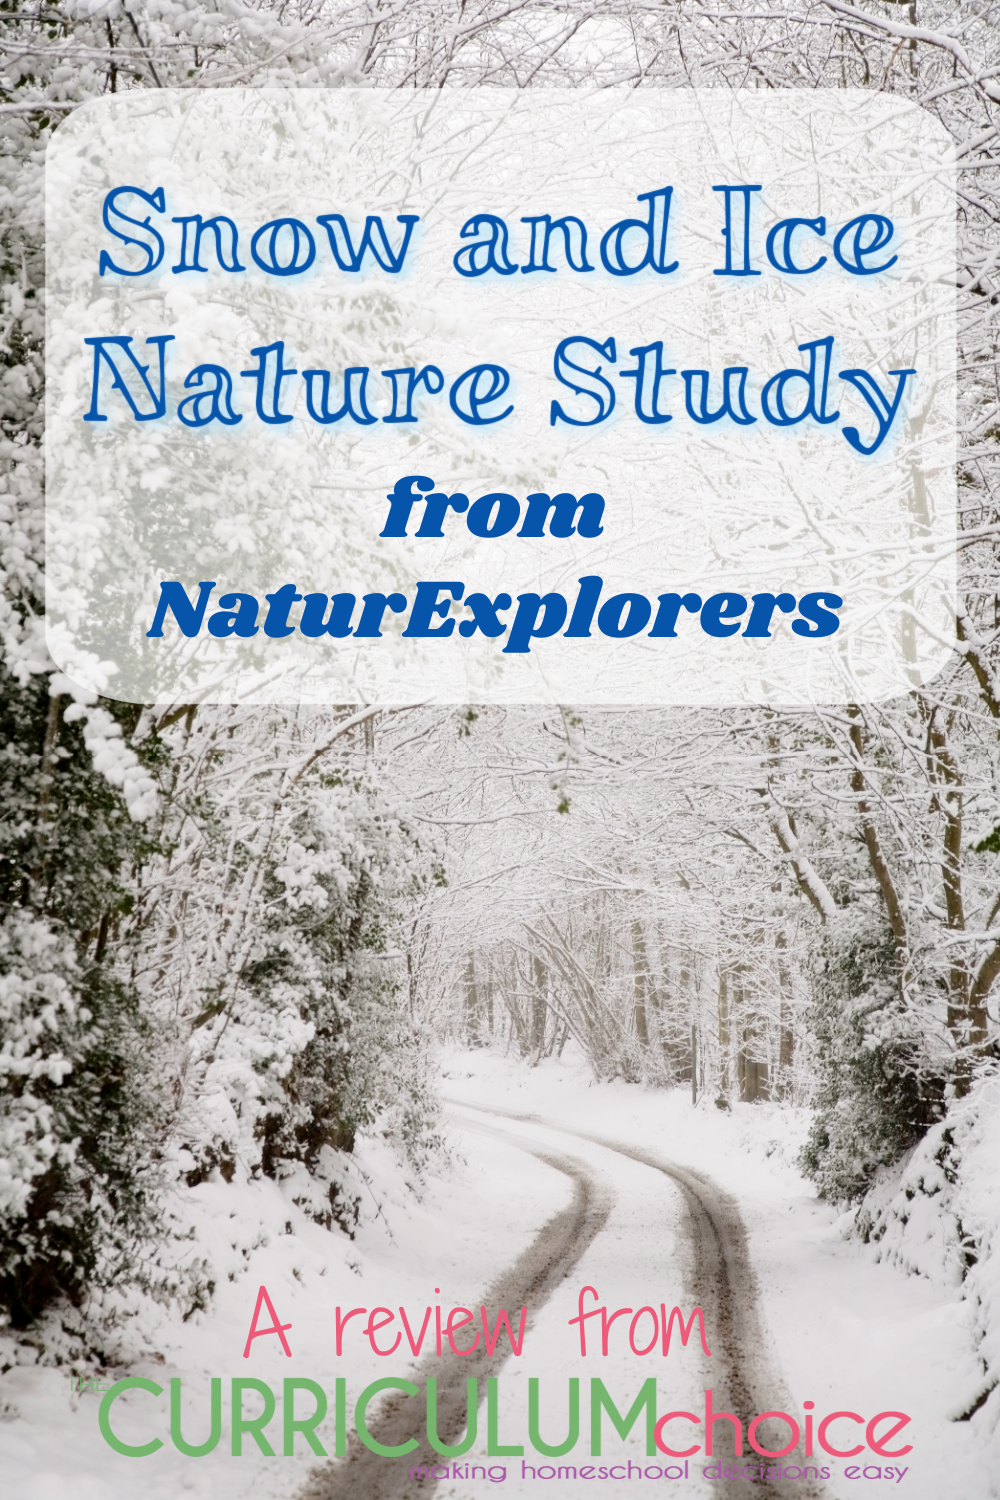 This Snow and Ice Nature Study from NaturExplorers is a nature unit study exploring snow, ice and frost with loads of activities and projects. A review from The Curriculum Choice